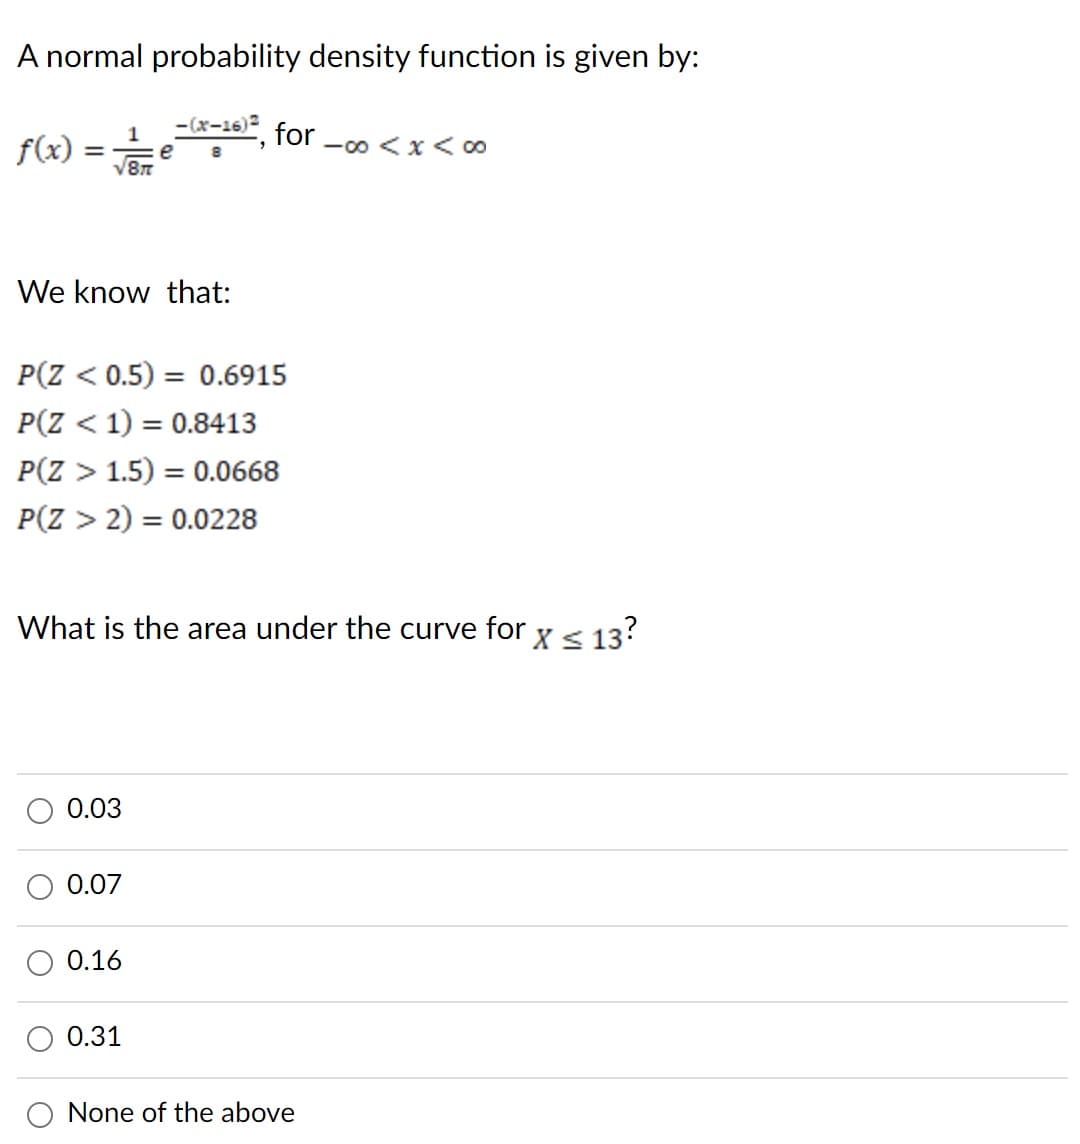 A normal probability density function is given by:
-(x-16)²
1
√8π
f(x)
=
We know that:
P(Z < 0.5) = 0.6915
P(Z < 1) = 0.8413
P(Z > 1.5) = 0.0668
P(Z > 2) = 0.0228
0.03
What is the area under the curve for x ≤ 13?
S
0.07
for
0.16
0.31
-∞0 < x <∞0
None of the above